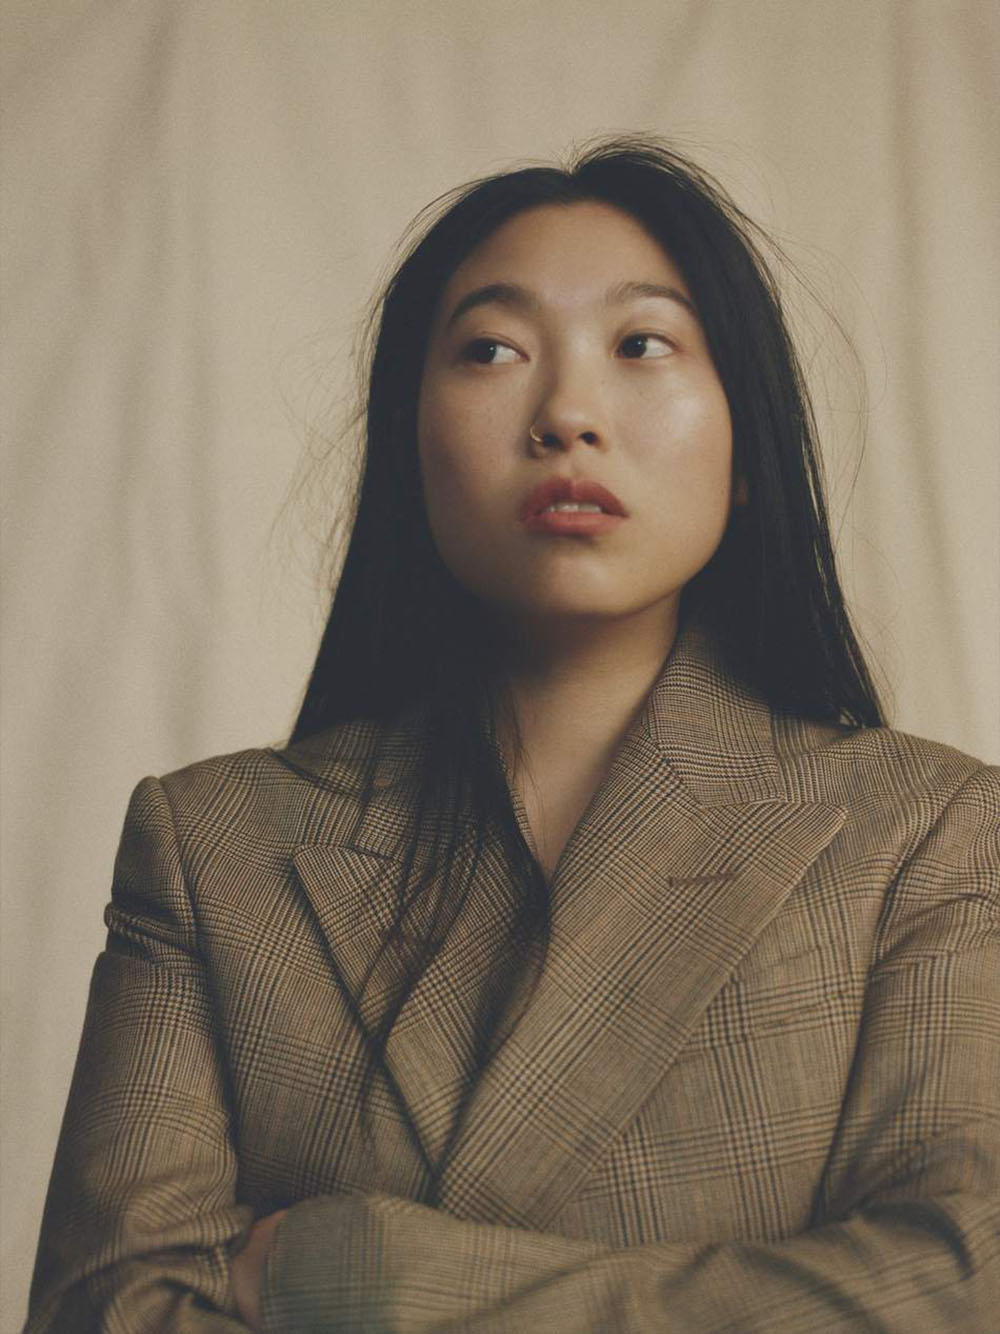 Awkwafina covers Porter Edit December 14th, 2018 by Carlota Guerrero